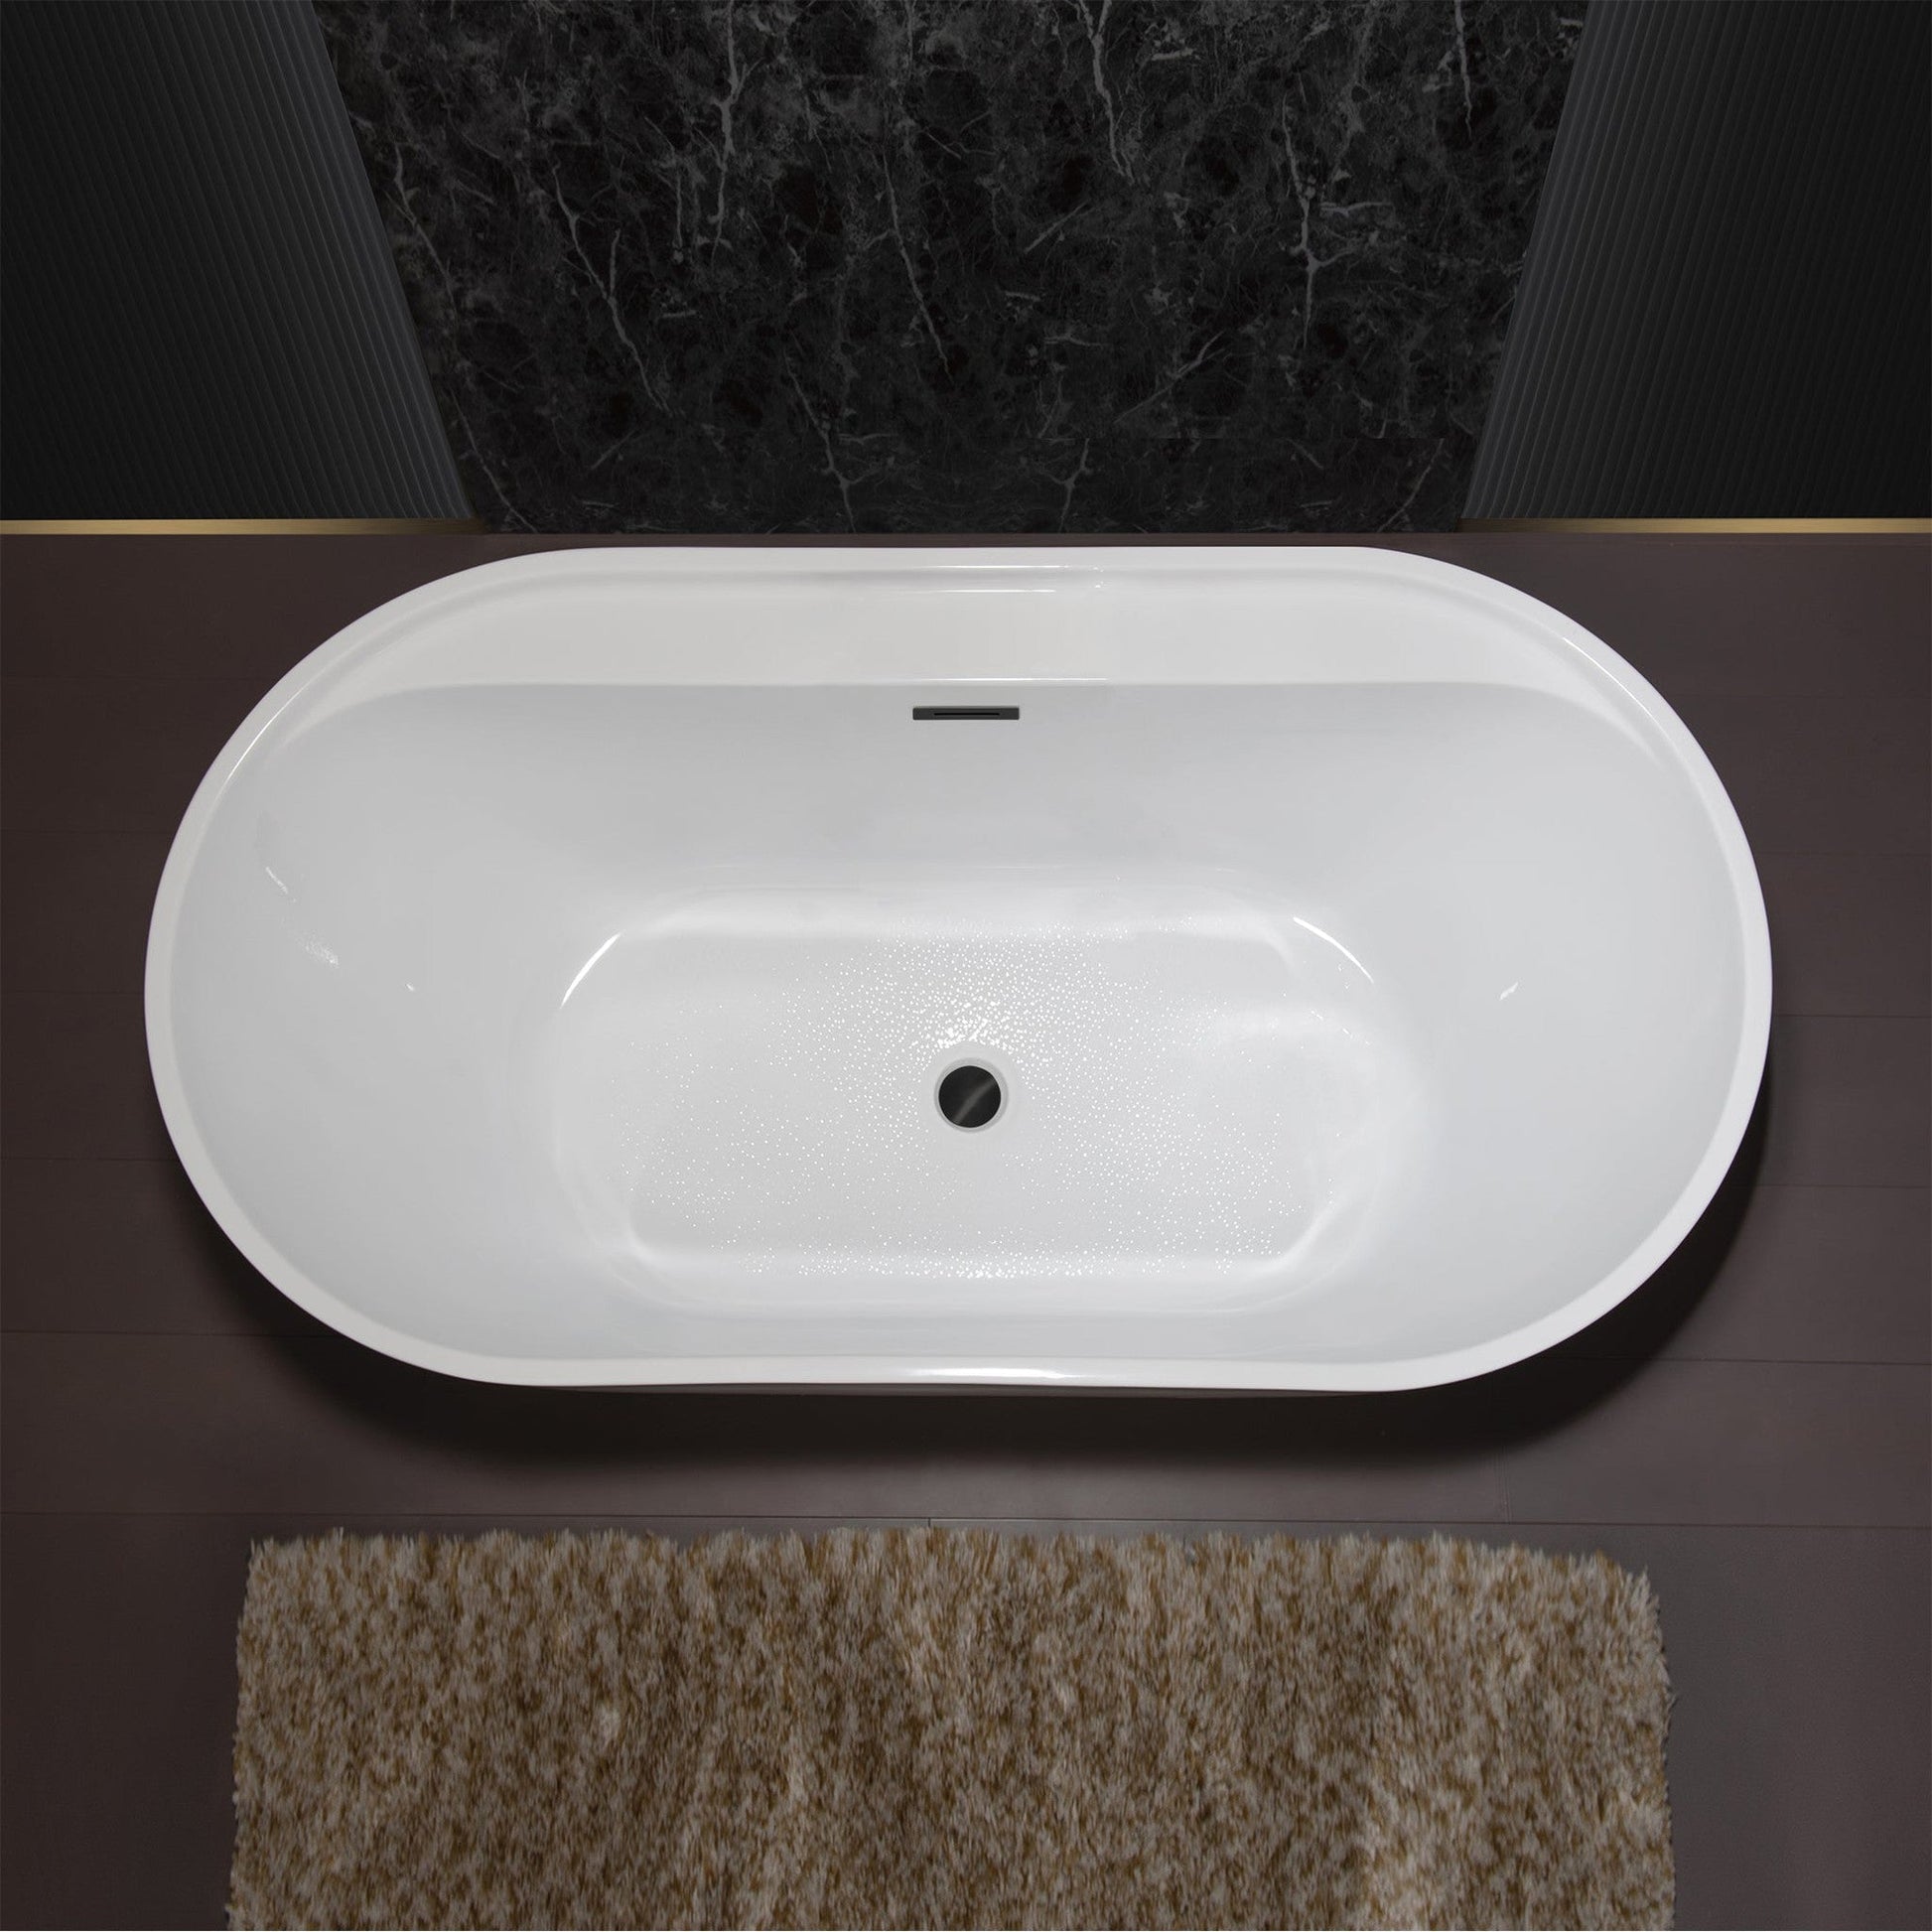 WoodBridge B0064 59" White Acrylic Freestanding Contemporary Soaking Bathtub With Matte Black Overflow, Drain, F0072MBVT Tub Filler and Caddy Tray